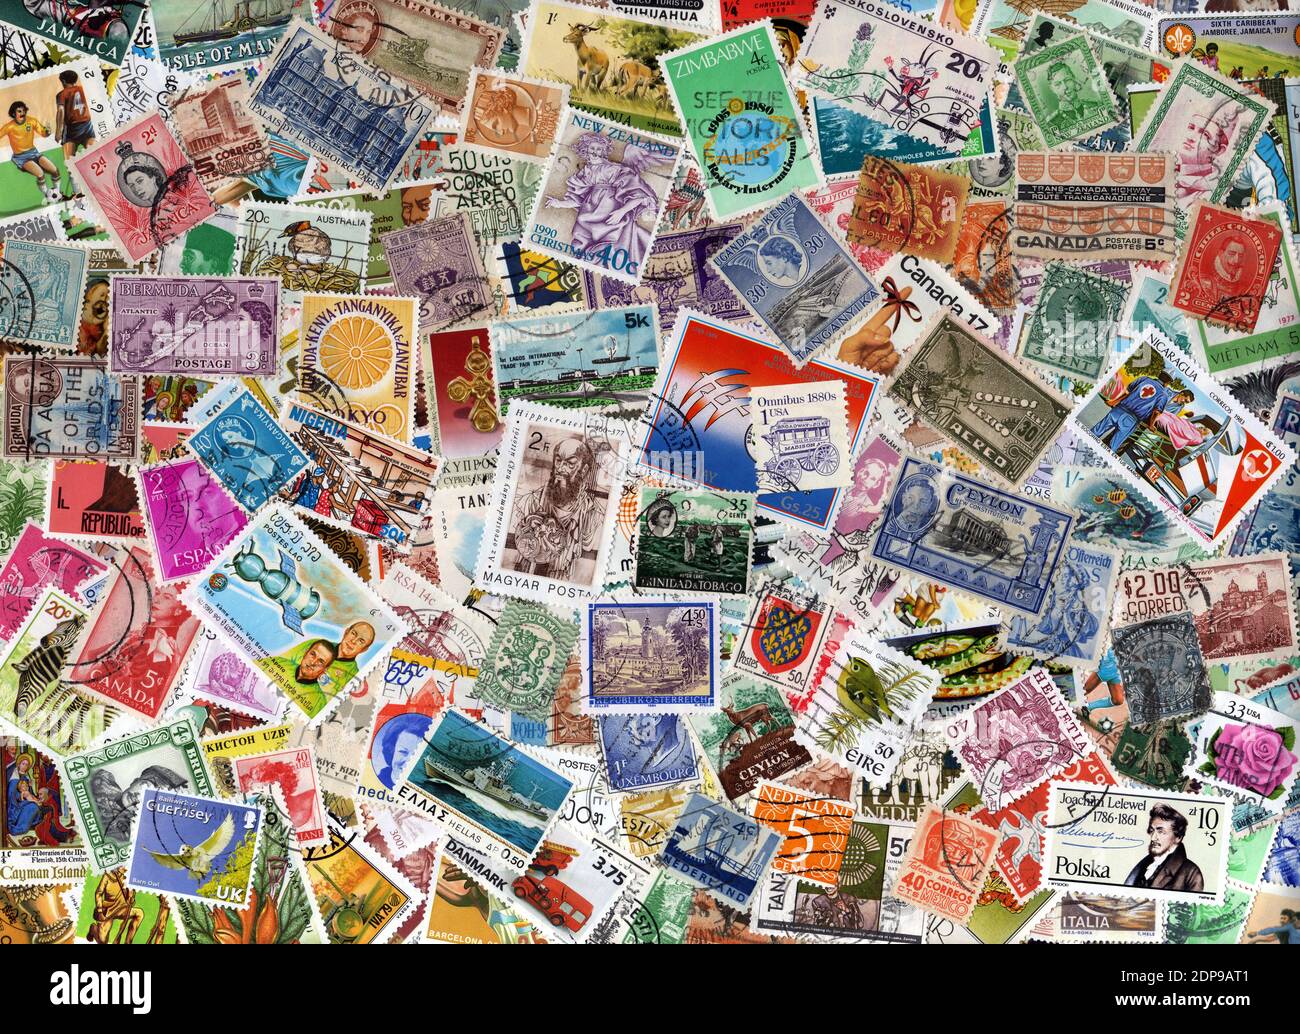 A large world foreign postage stamp collection background, stock photo image Stock Photo